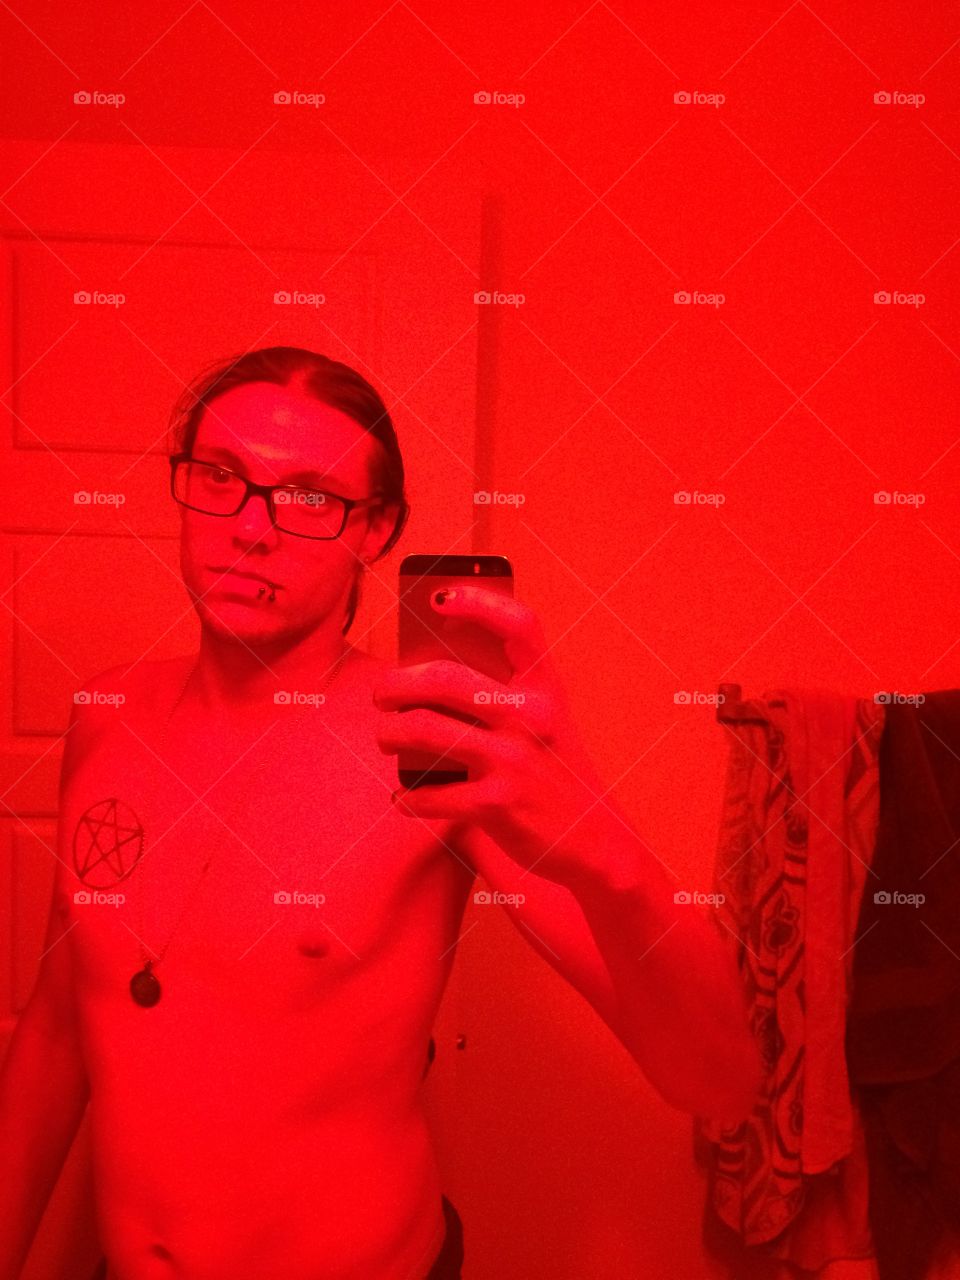 No filter, just 2 red light bulbs in my bathroom, It definitely feels like a room for developing photographs!